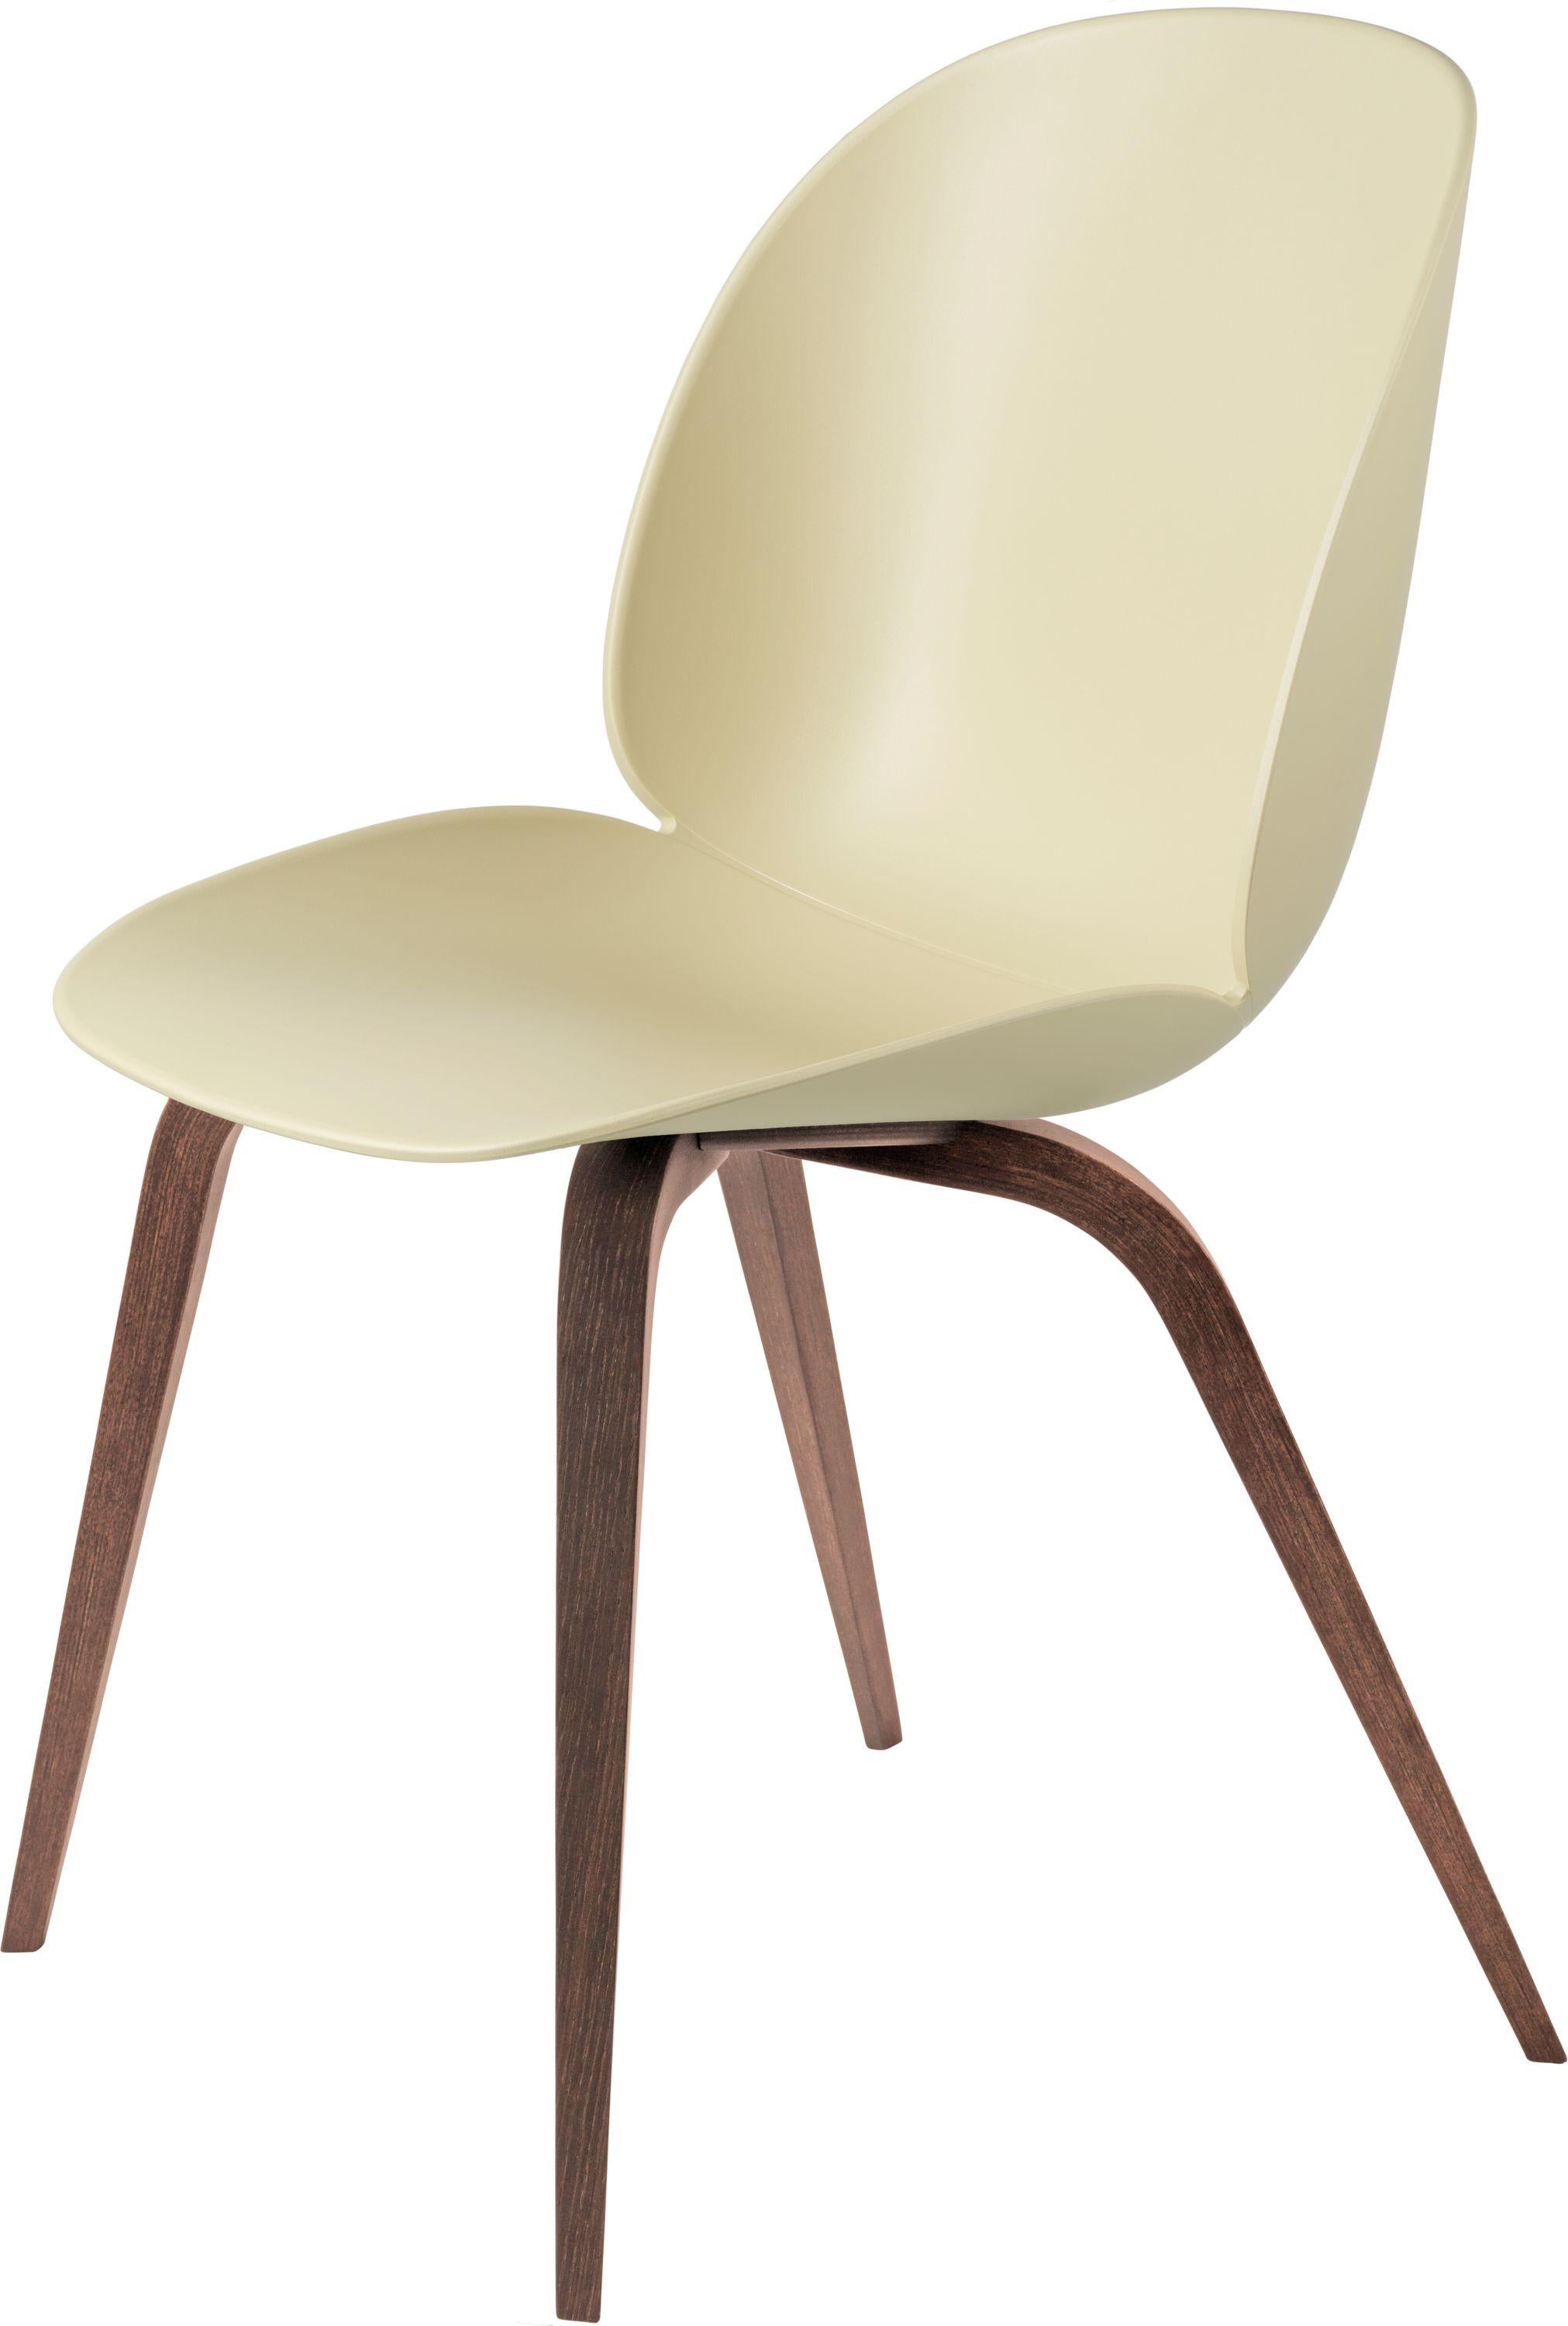 Lacquered GamFratesi 'Beetle' Dining Chair with Walnut Conic Base